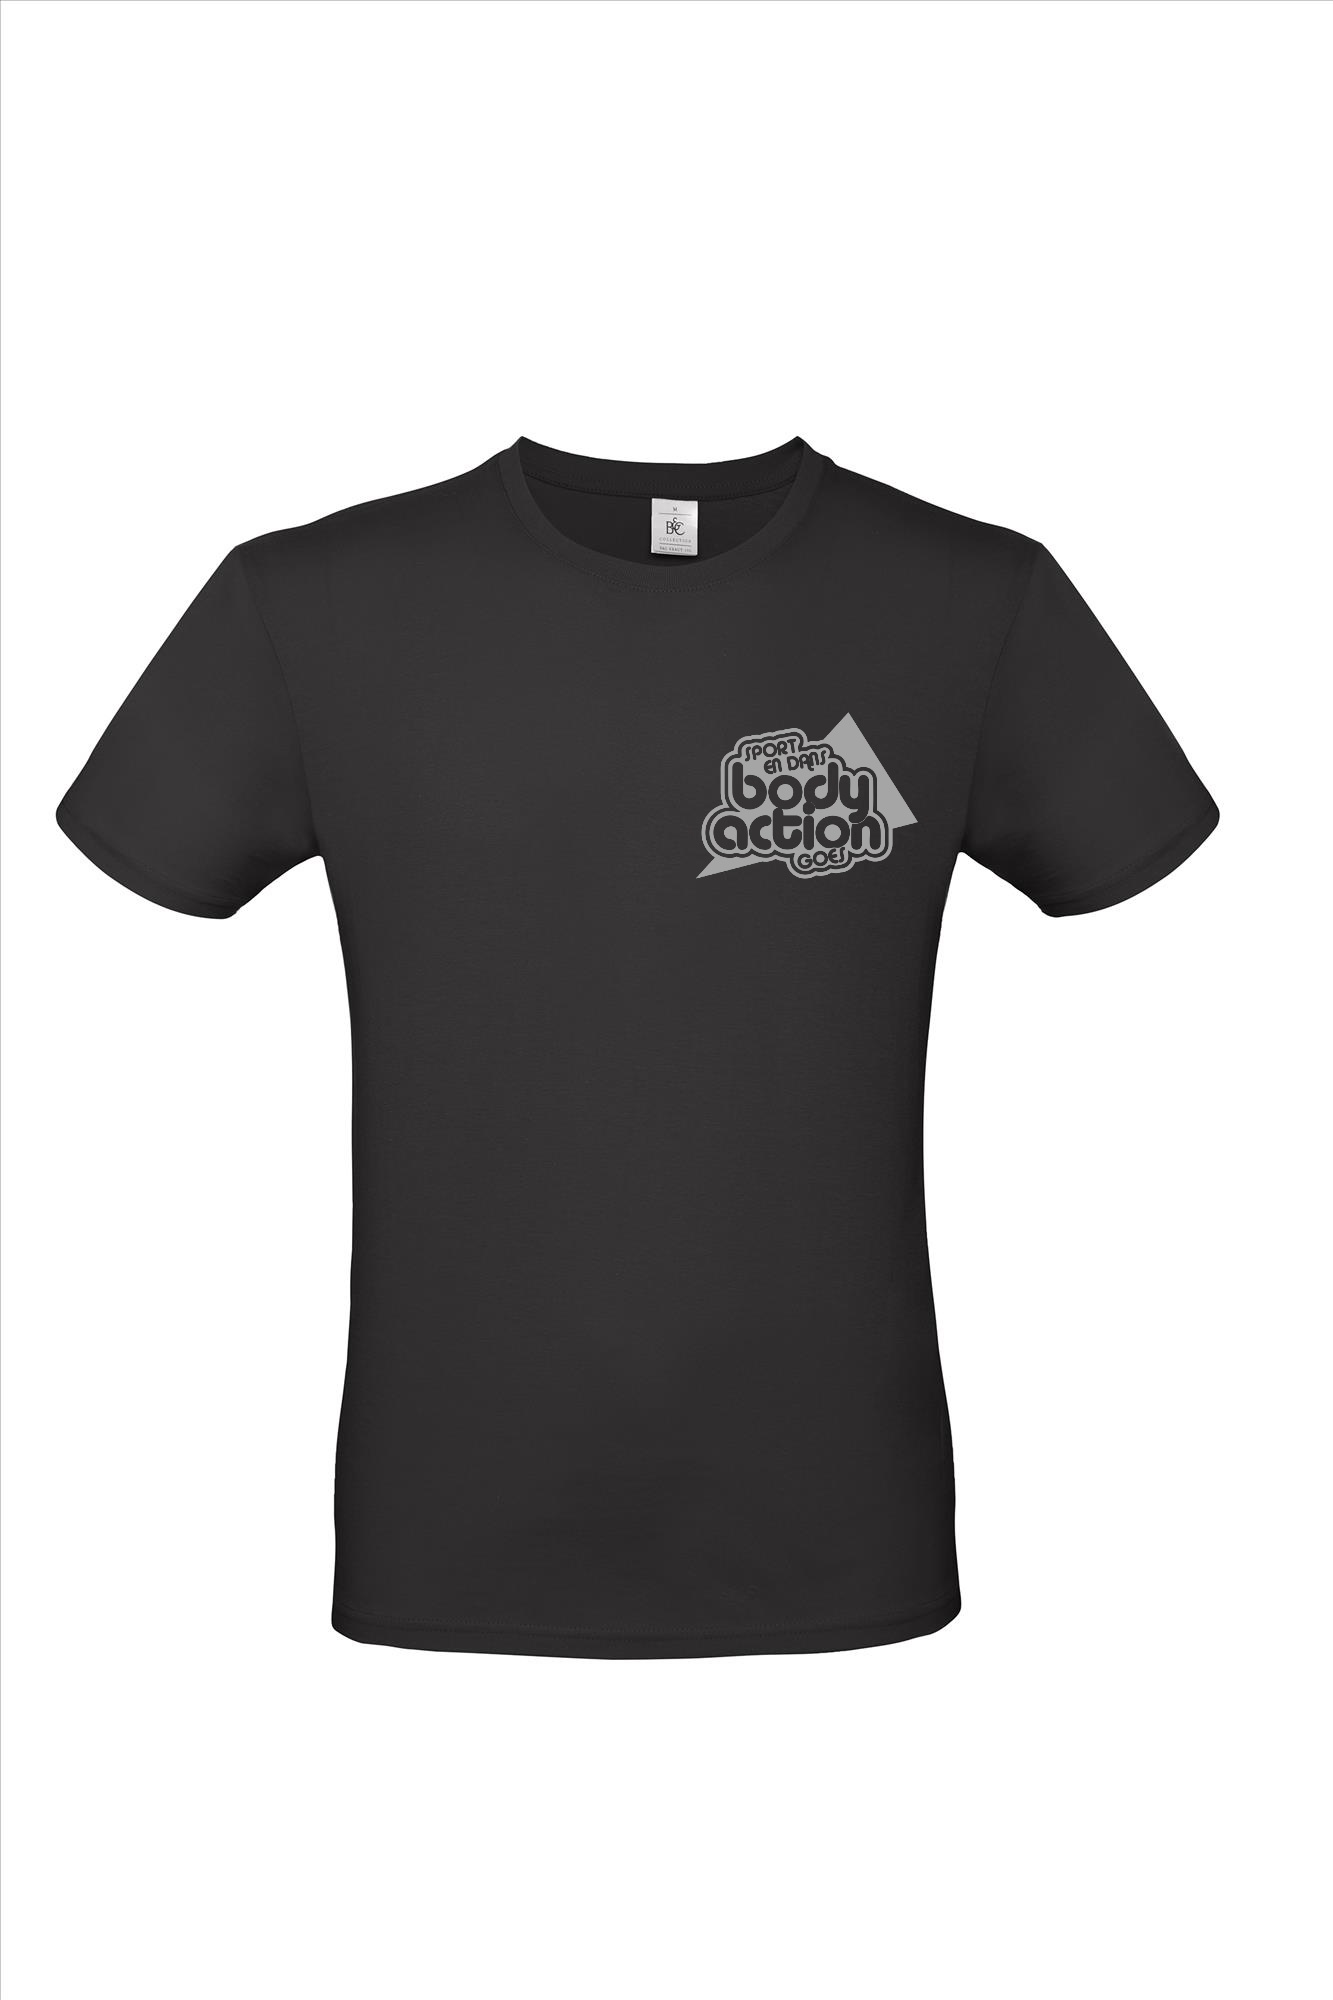 BODY ACTION | T-SHIRT ZILVER